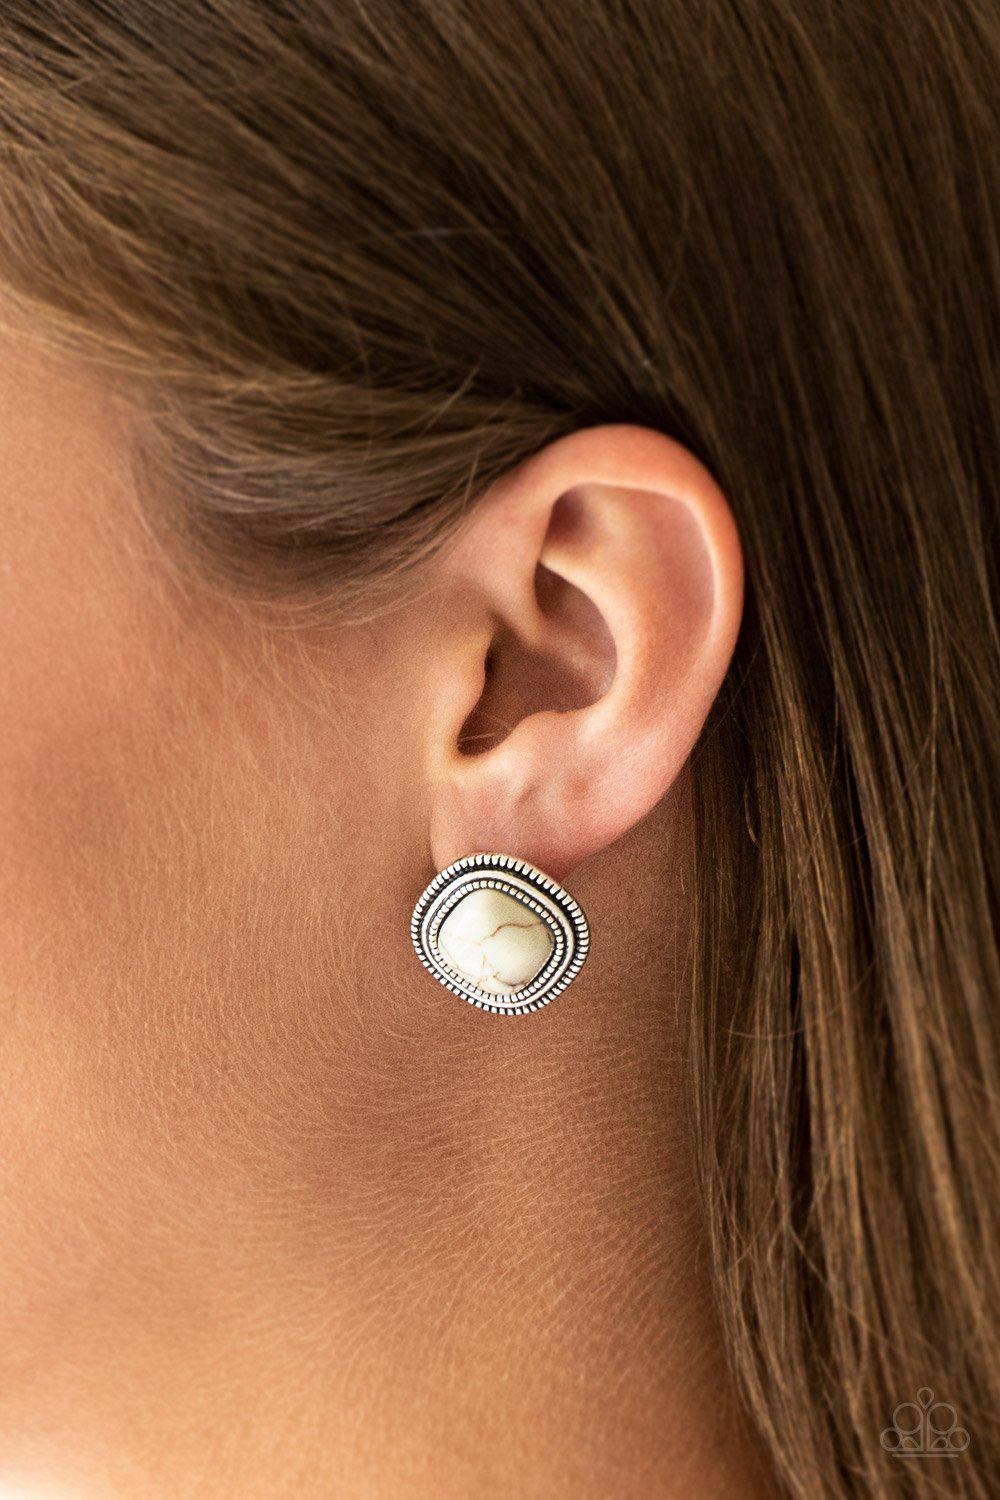 Frontier Runner White Stone Post Earrings - Paparazzi Accessories- lightbox - CarasShop.com - $5 Jewelry by Cara Jewels